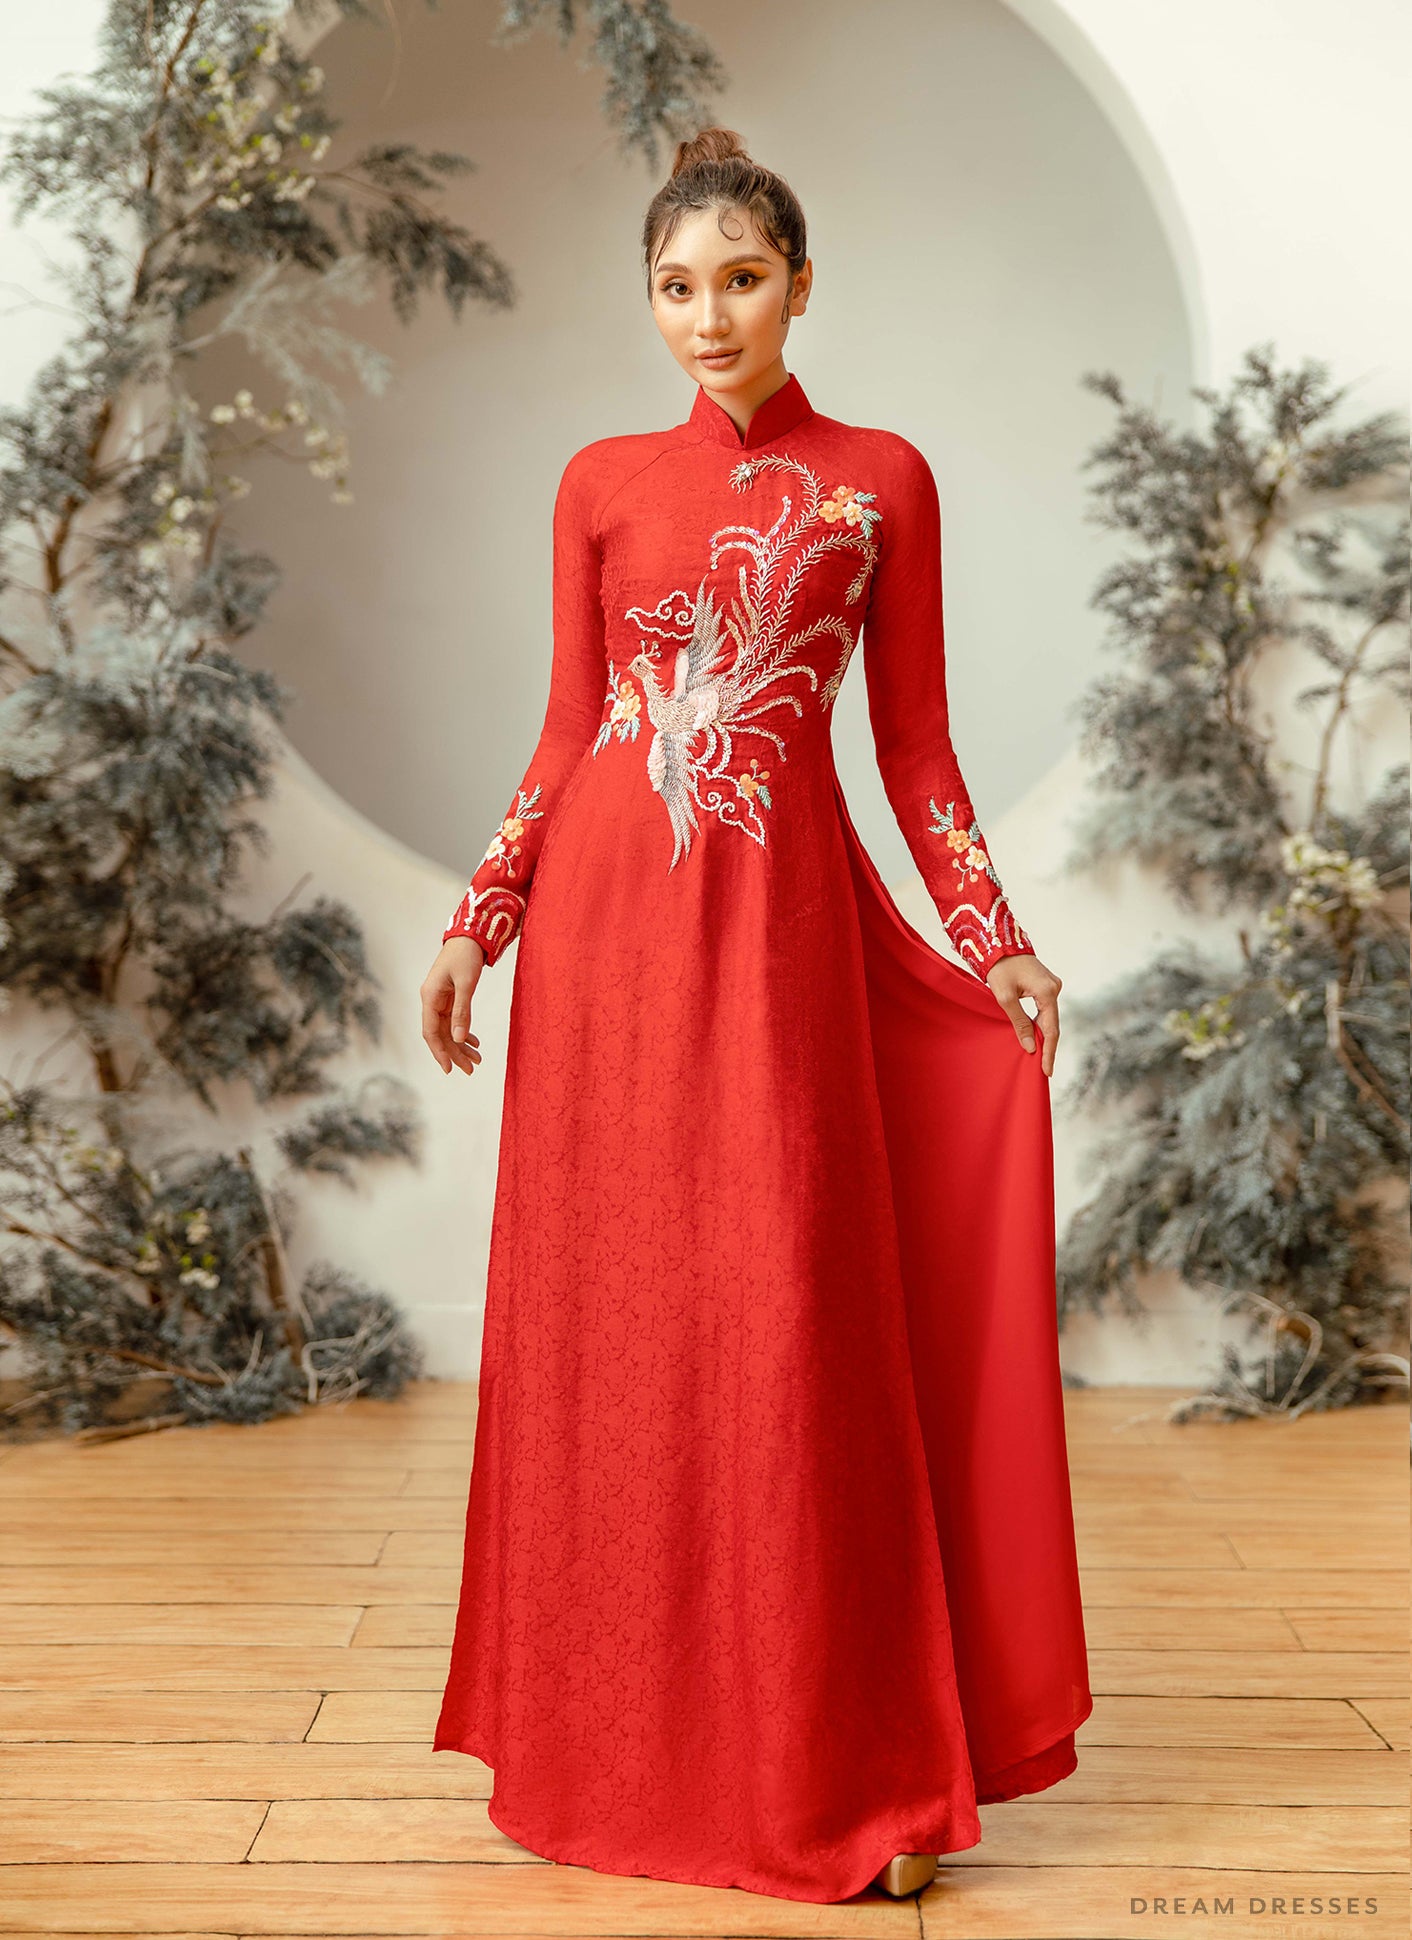 Ao dai Vietnamese traditional dress in red - Hien Thao Shop